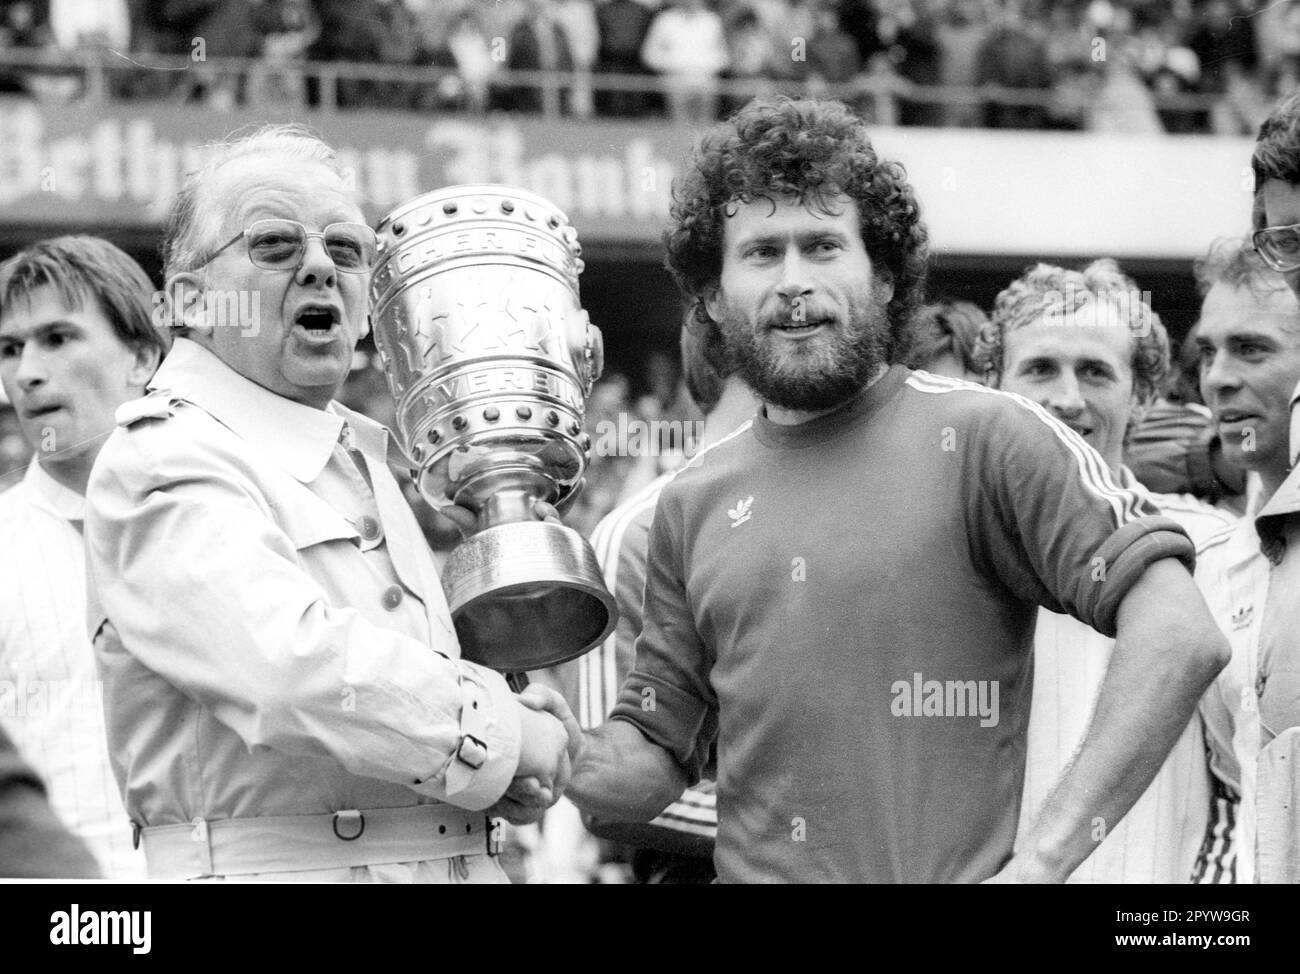 DFB cup final FC Bayern Muenchen - 1. FC Nuernberg 4:2 /01.05.1982/ DFB president Hermann Neuberger presents the cup to Paul Breitner (FC Bayern) [automated translation] Stock Photo